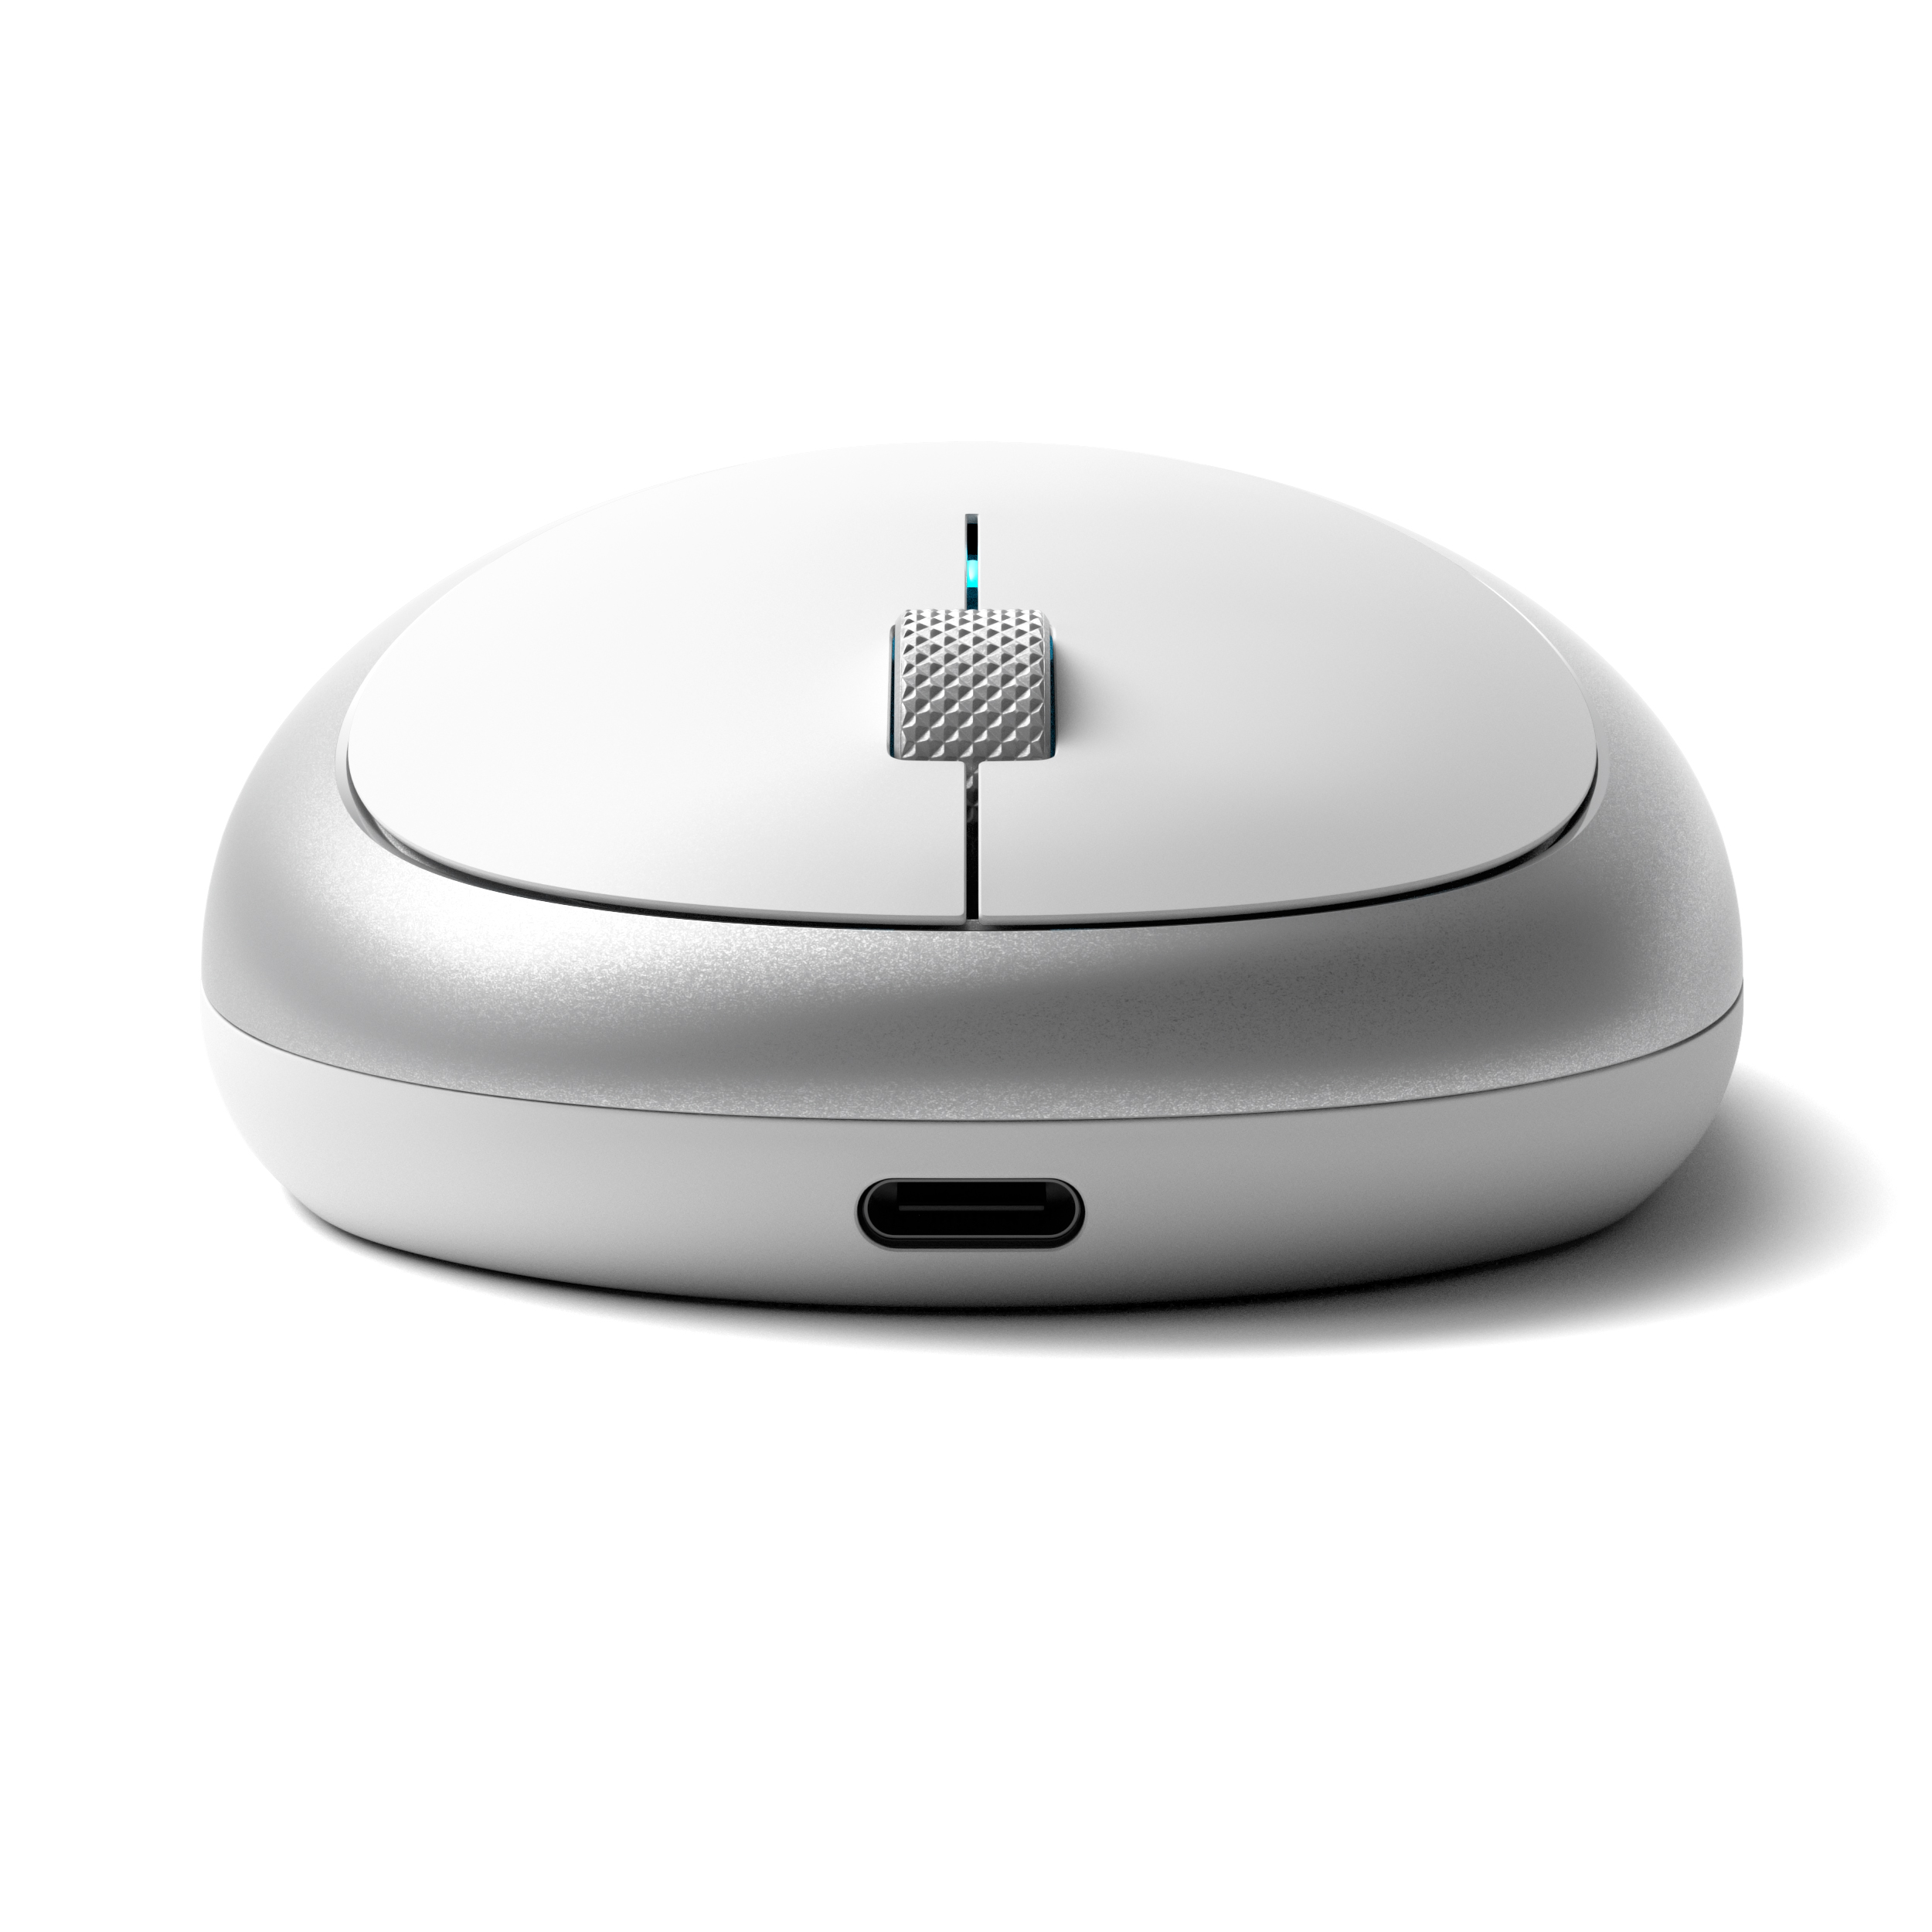 SATECHI M1 Bluetooth Wireless Mouse - Silber Silver Maus